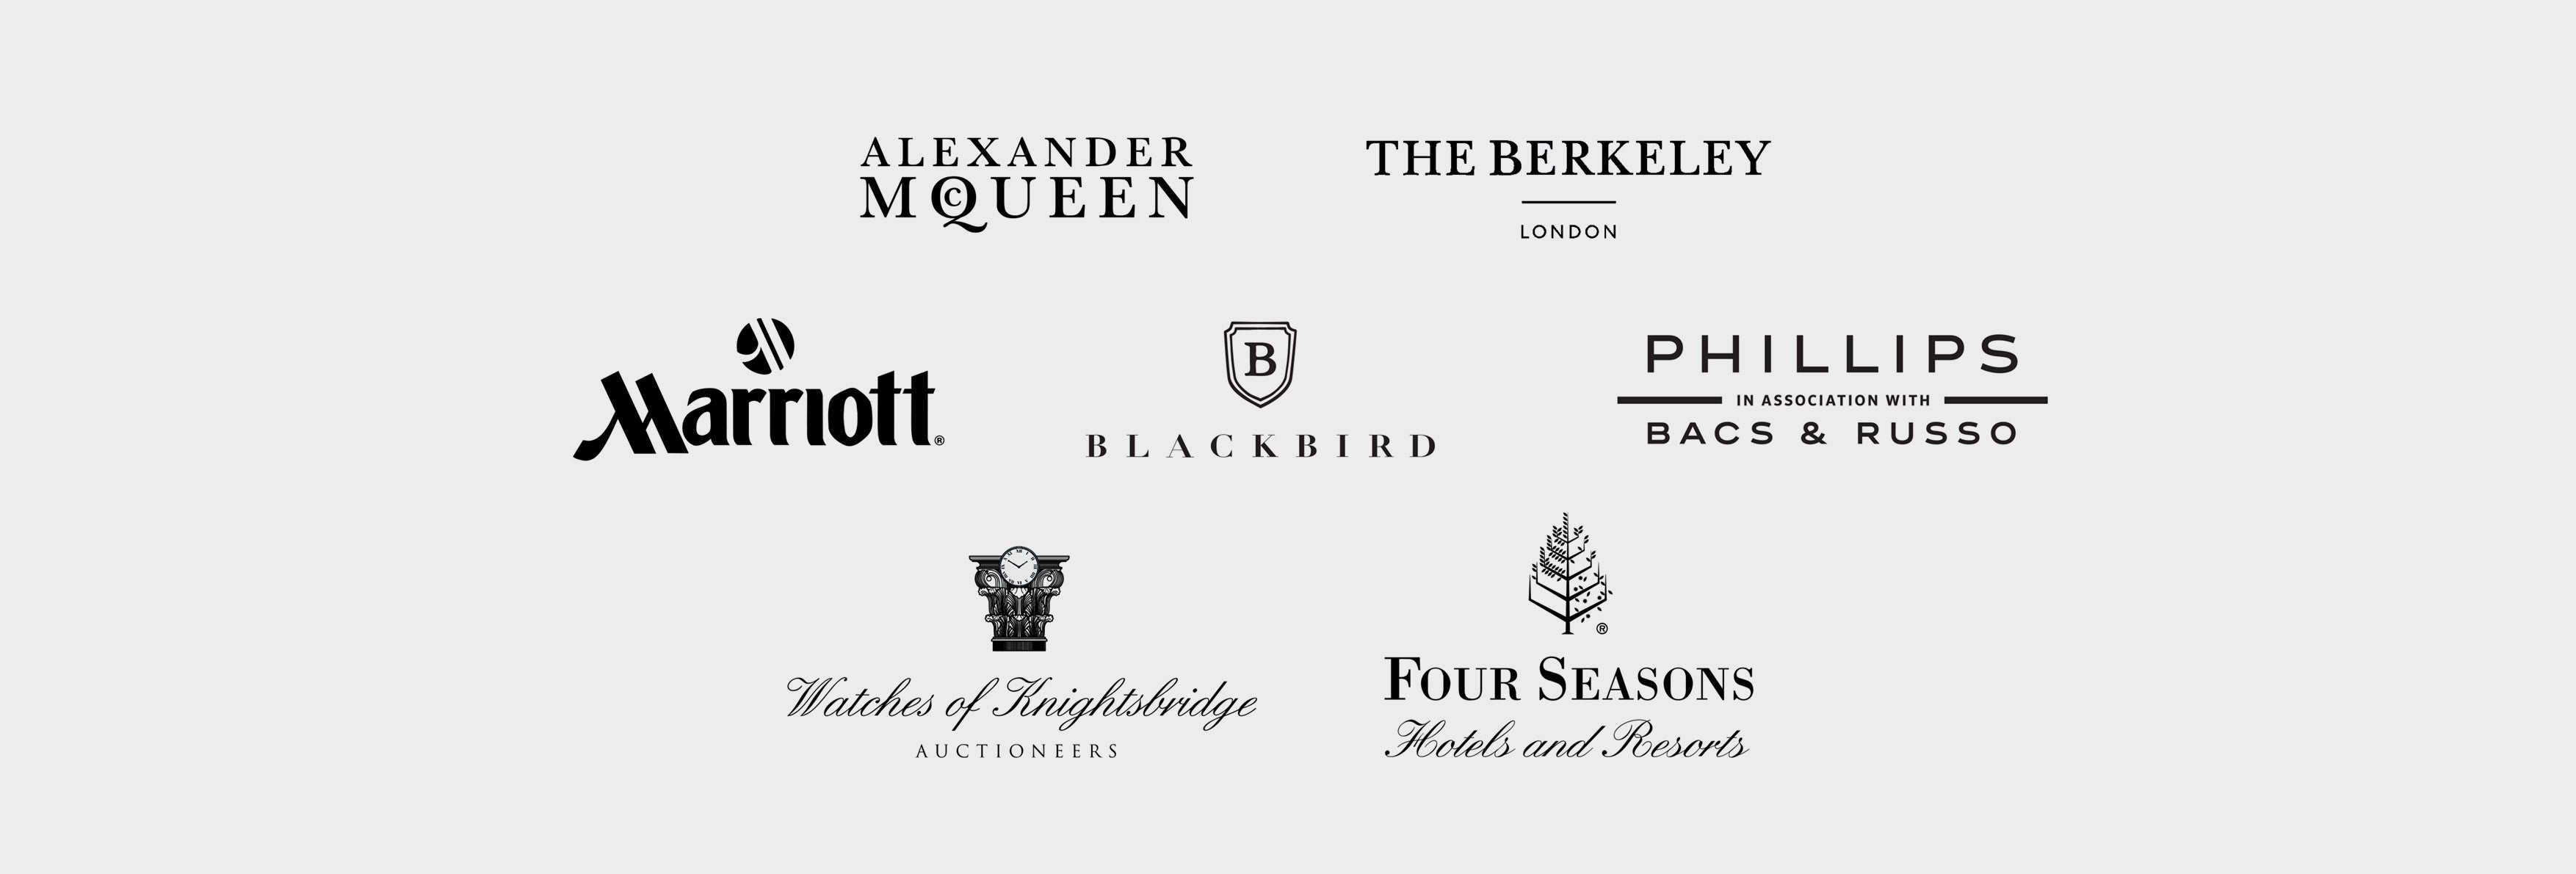 Esteemed clientele of Noble and graff includes blackbird, watches of knightsbridge, four seasons, phillips auction house and more